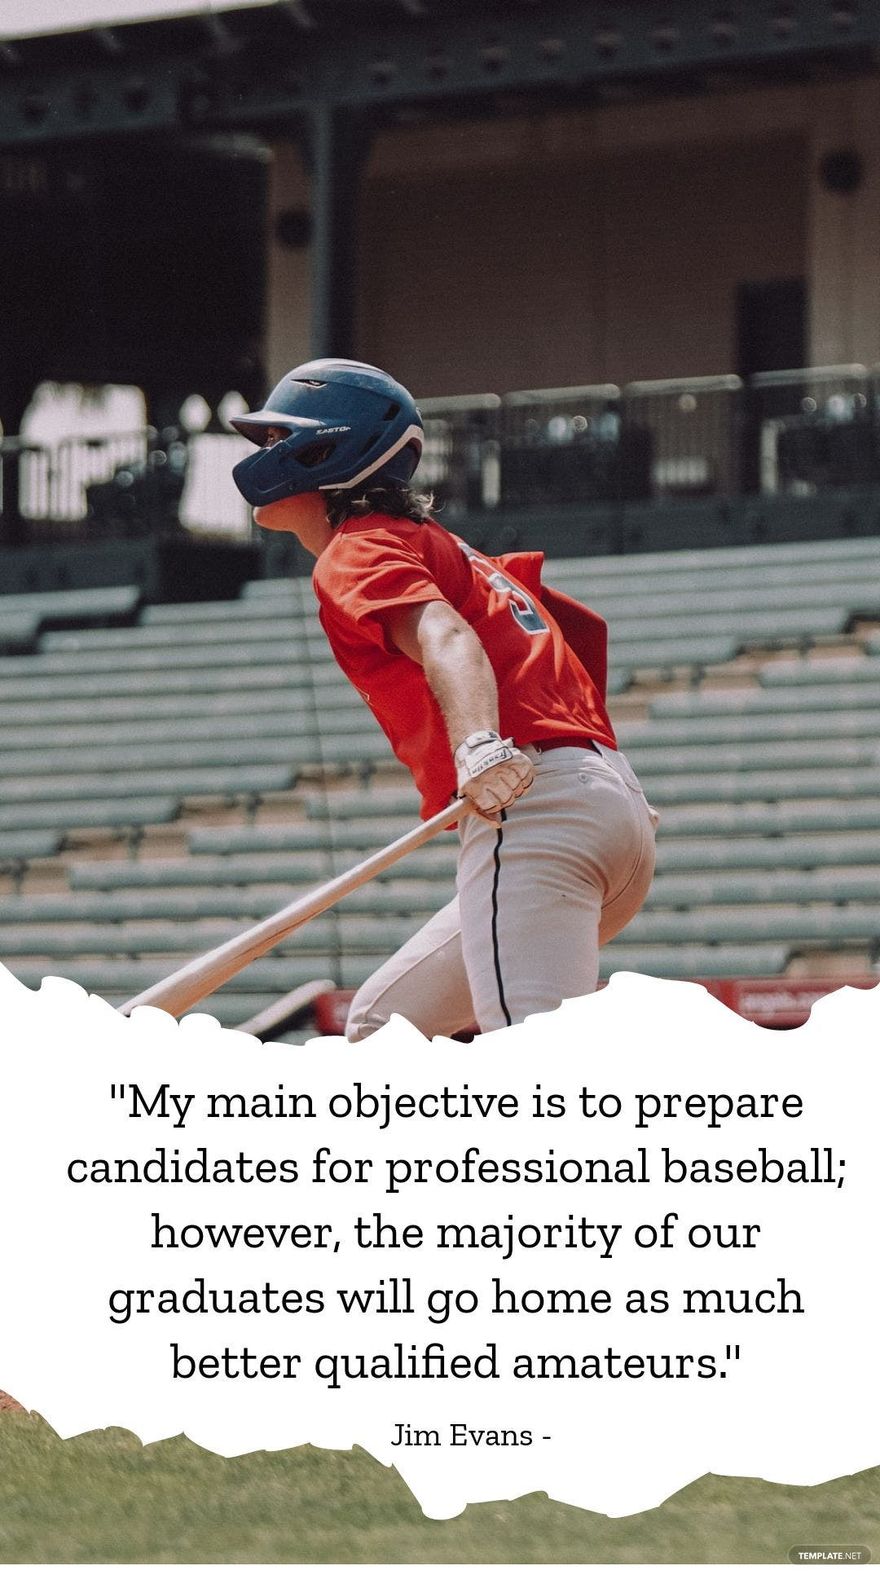 Free Jim Evans - My main objective is to prepare candidates for professional baseball; however, the majority of our graduates will go home as much better qualified amateurs. in JPG